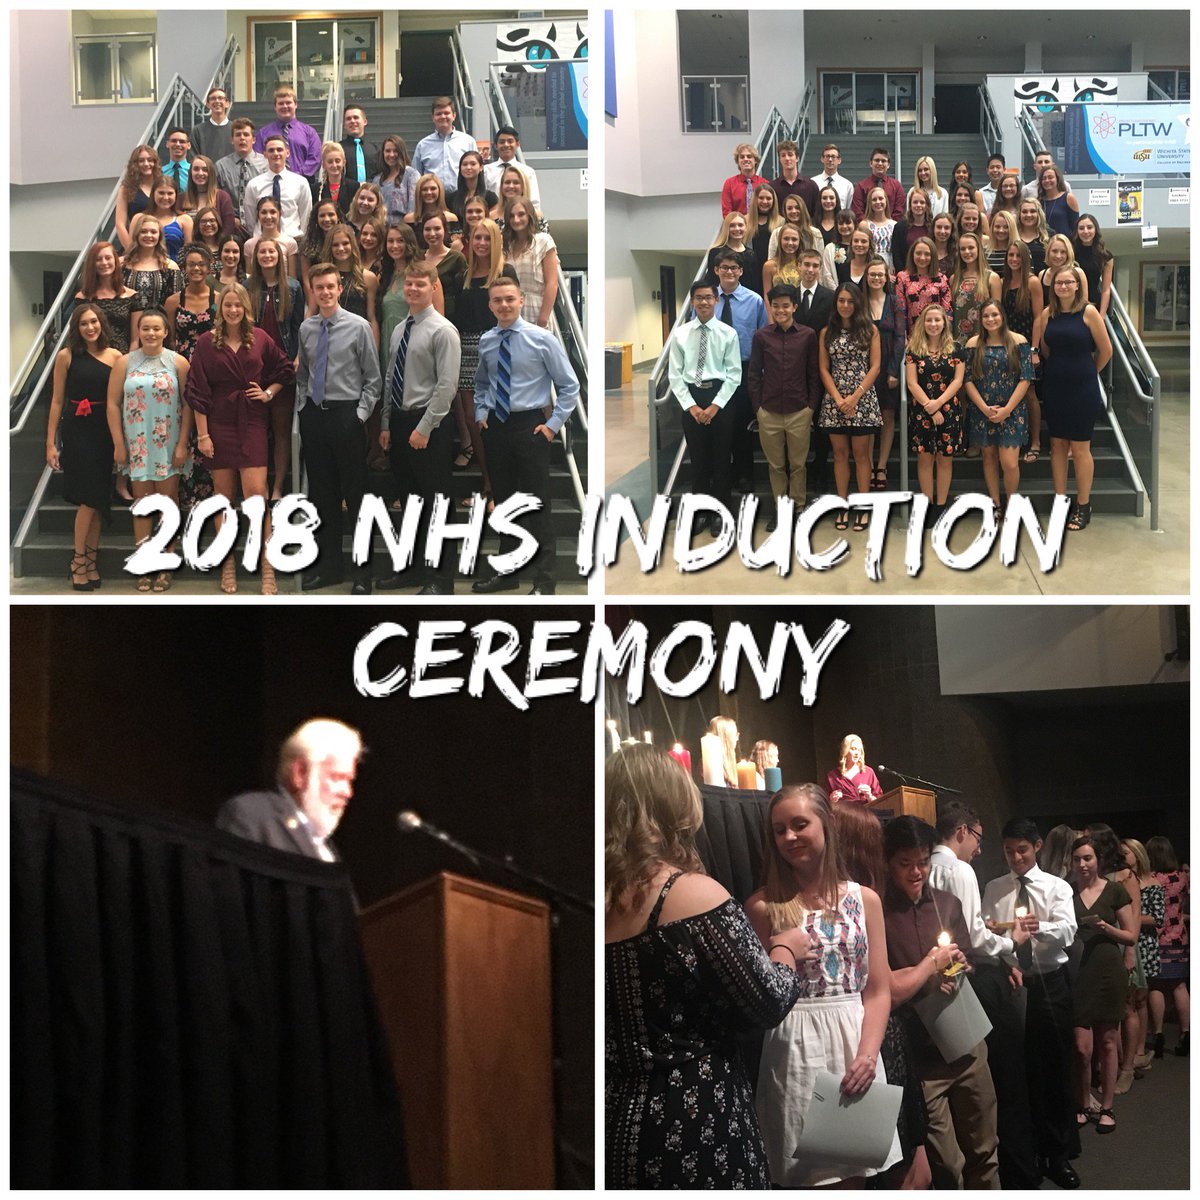 A great night to recognize new & returning members at the NHS Inductions. Honored to have guest speaker Tim Norton and his inspiring words! Thanks Admiral Windwagon Smith #45!  #charactercounts #championchange #servantleadership #surroundyourselfwithgoodpeople #infinitepotential